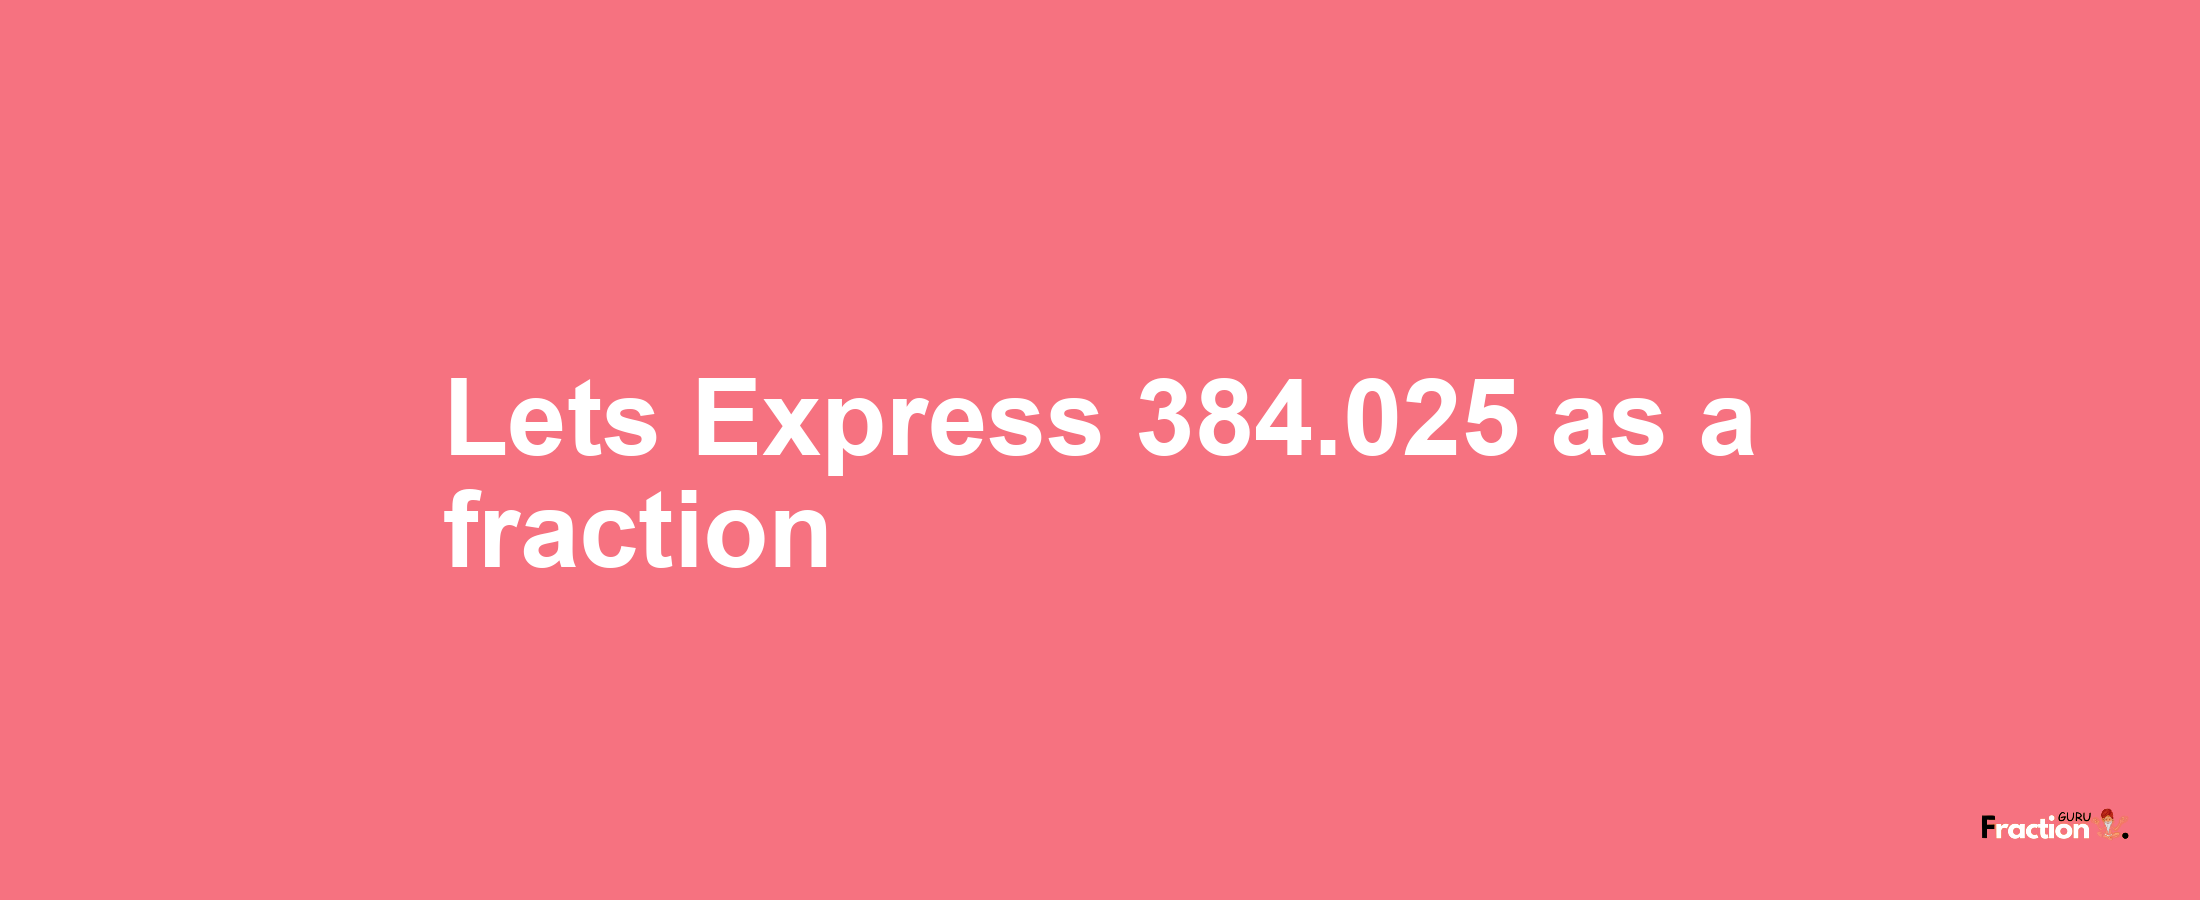 Lets Express 384.025 as afraction